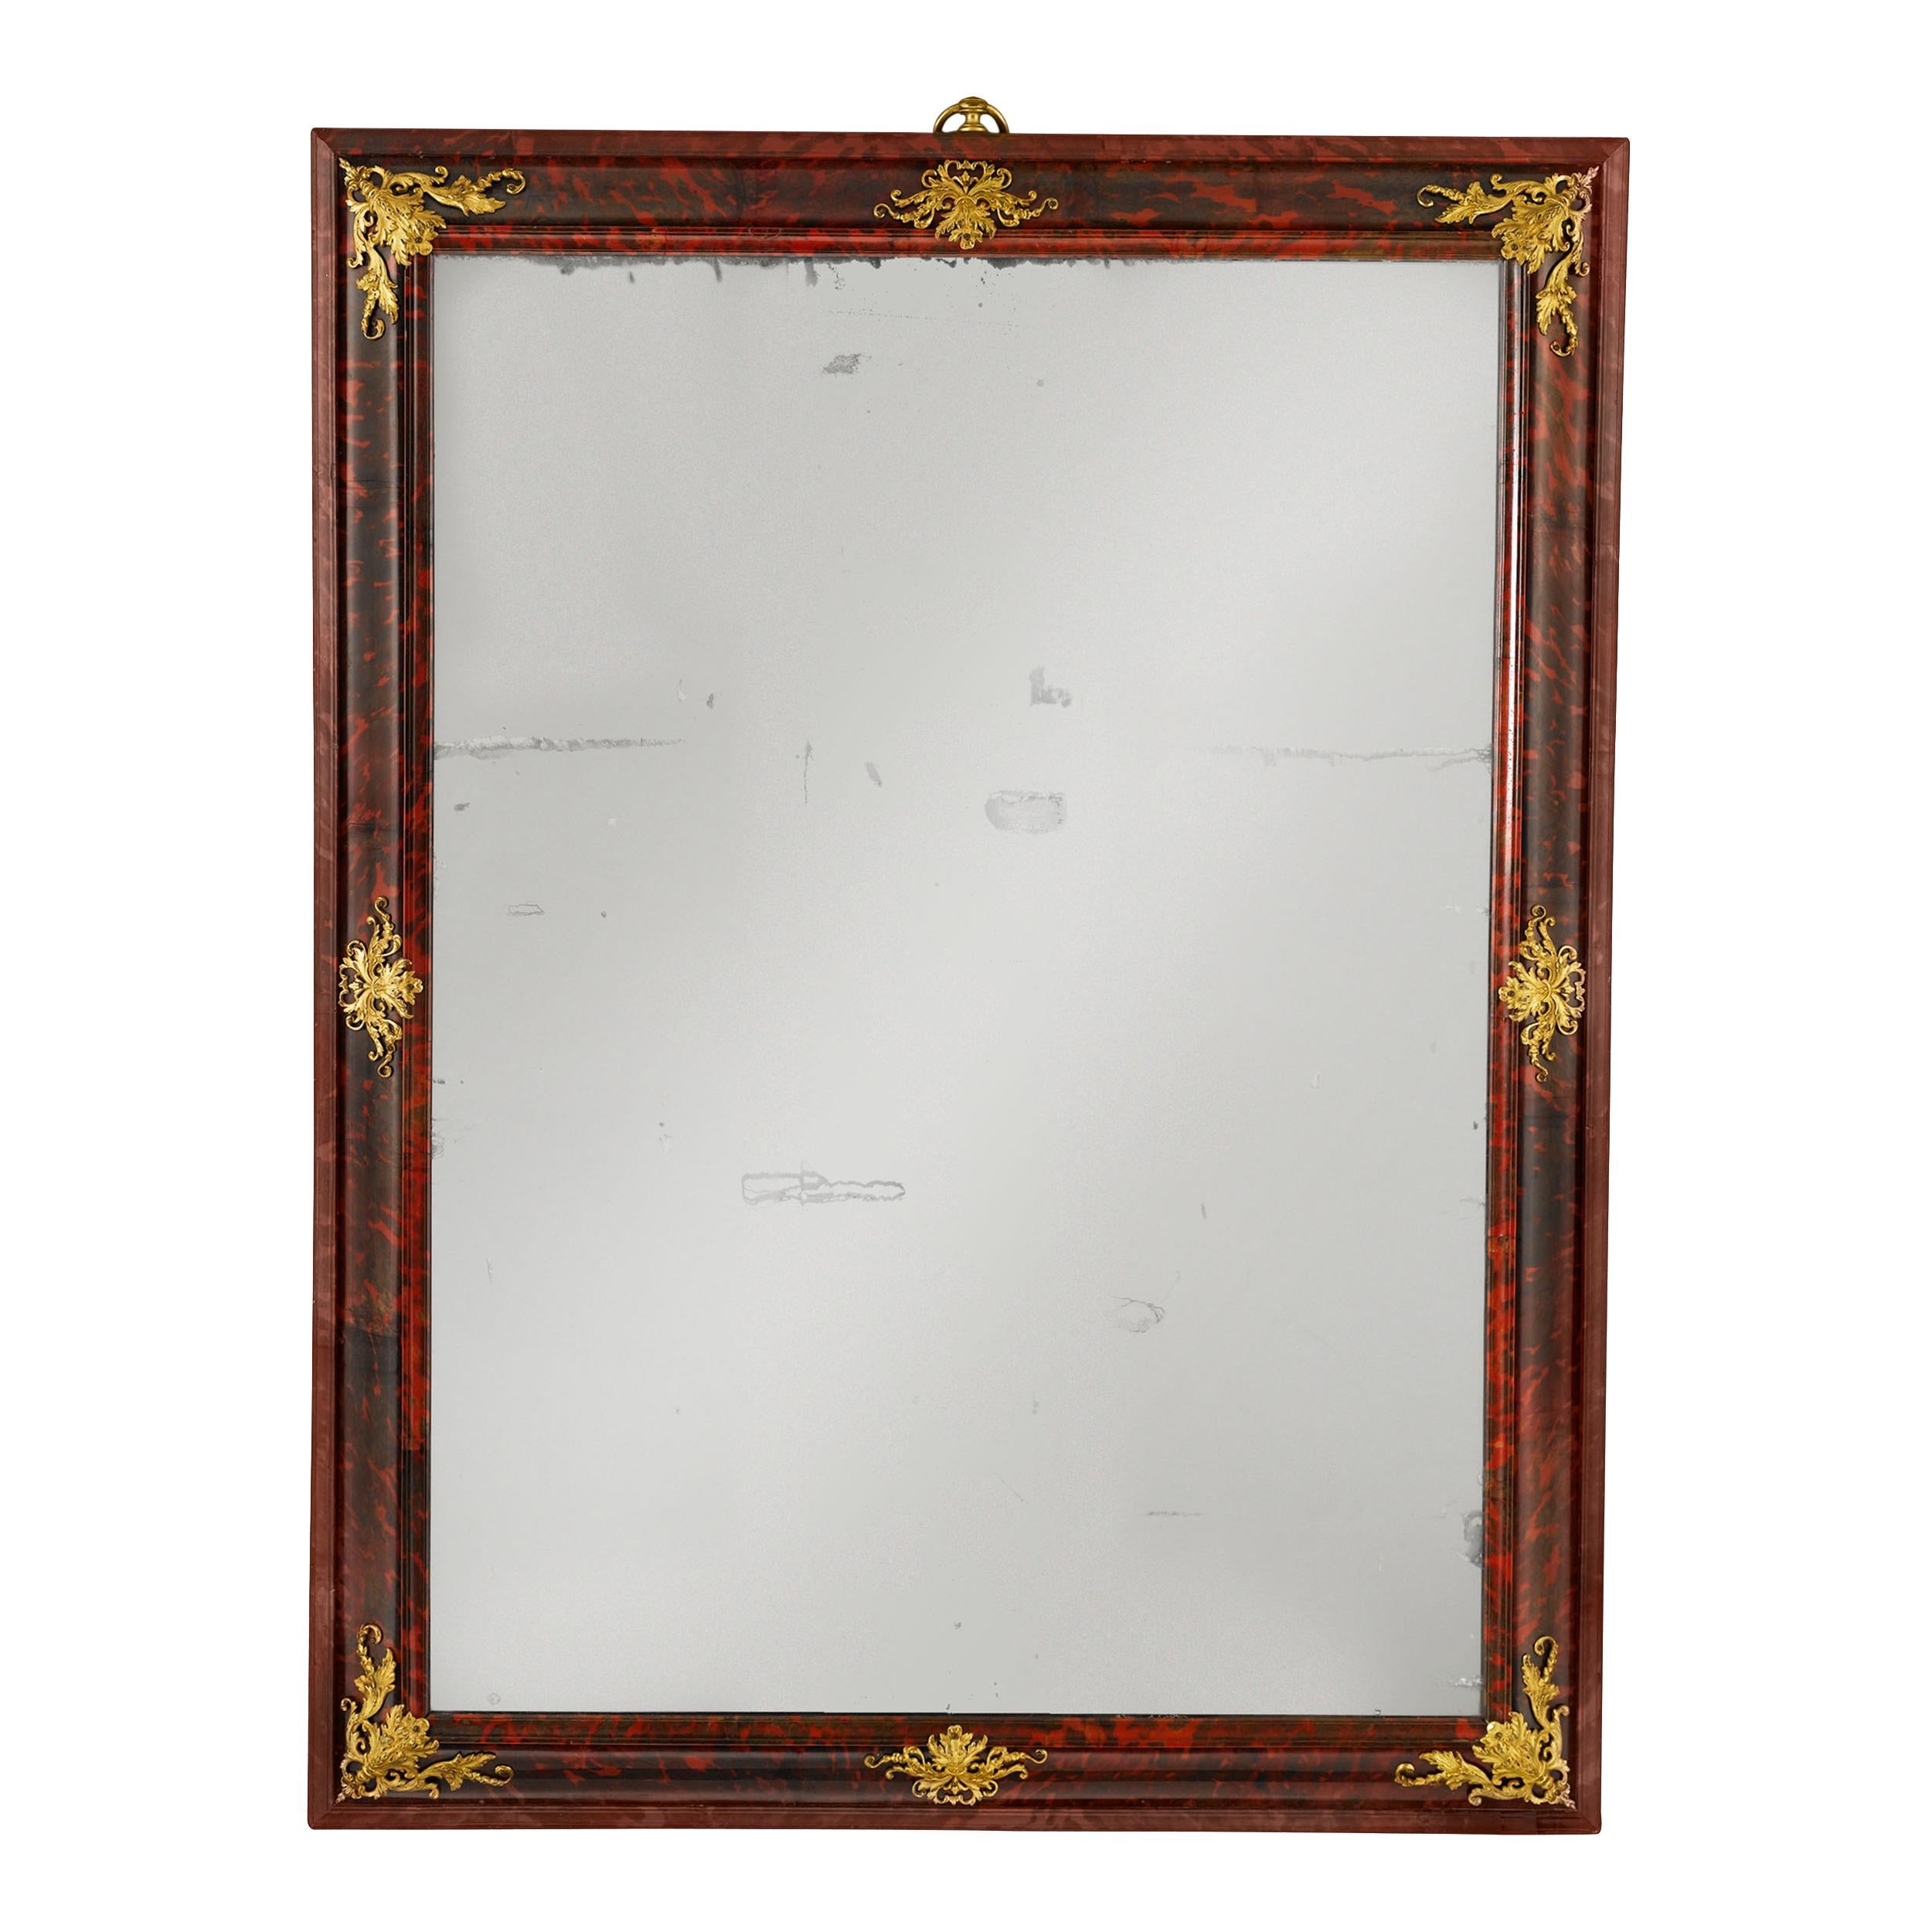 This magnificent and very rare Louis XIV period mirror boasts a frame of solid tortoiseshell veneer accented with intricate bronze ormolu mounts. This is an item of extraordinary luxury, as not only was mirror glass quite precious and in short